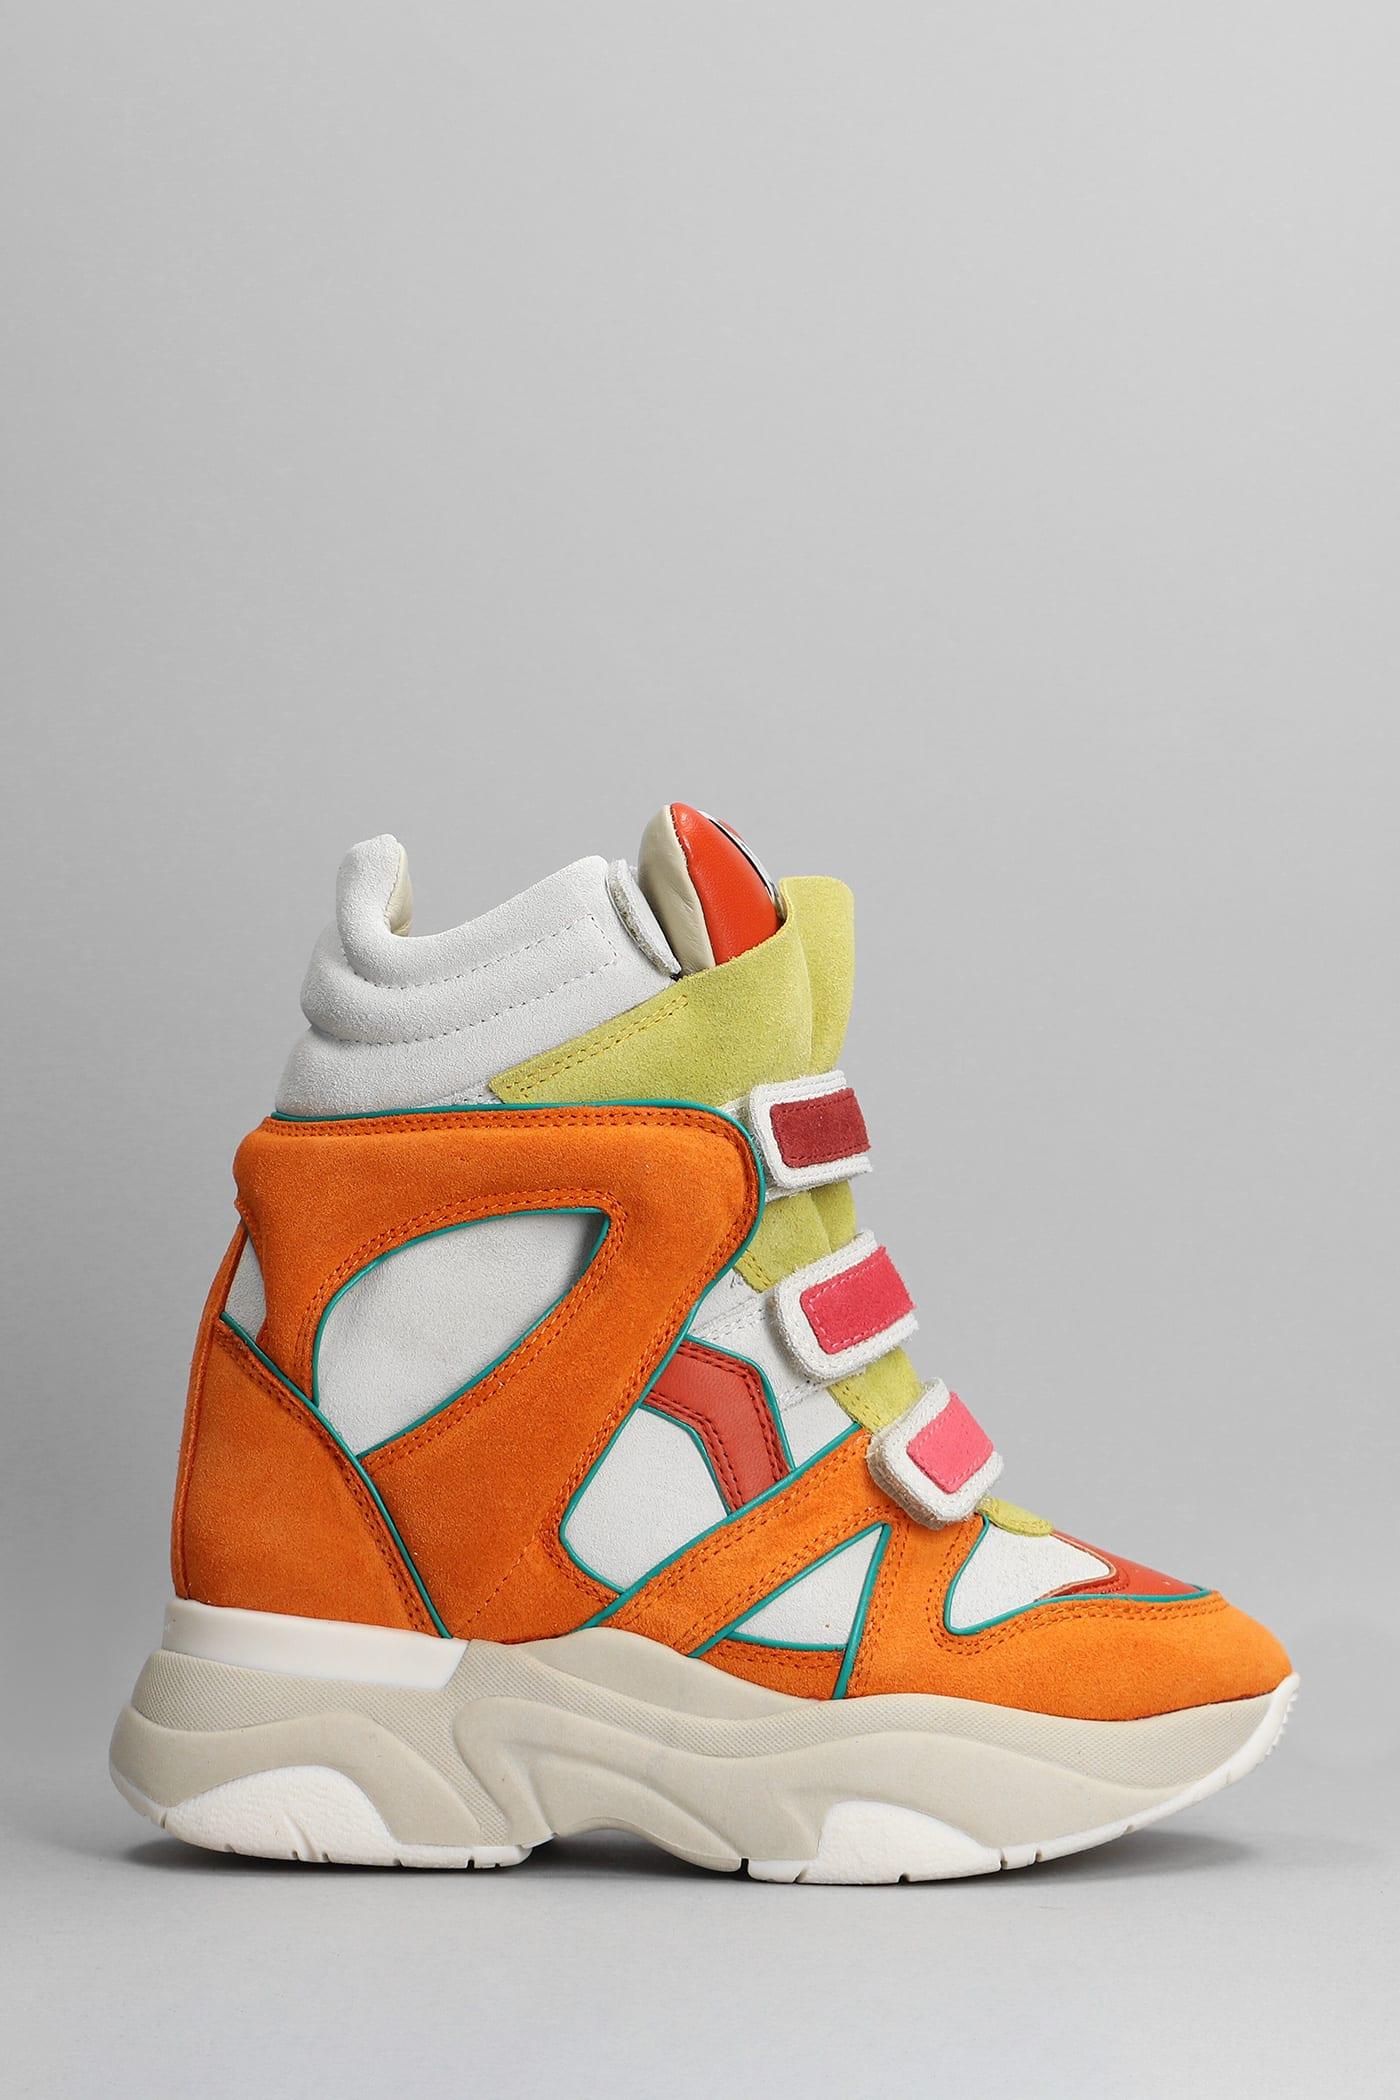 Isabel Marant Balskee Sneakers Orange Suede And Leather | Lyst